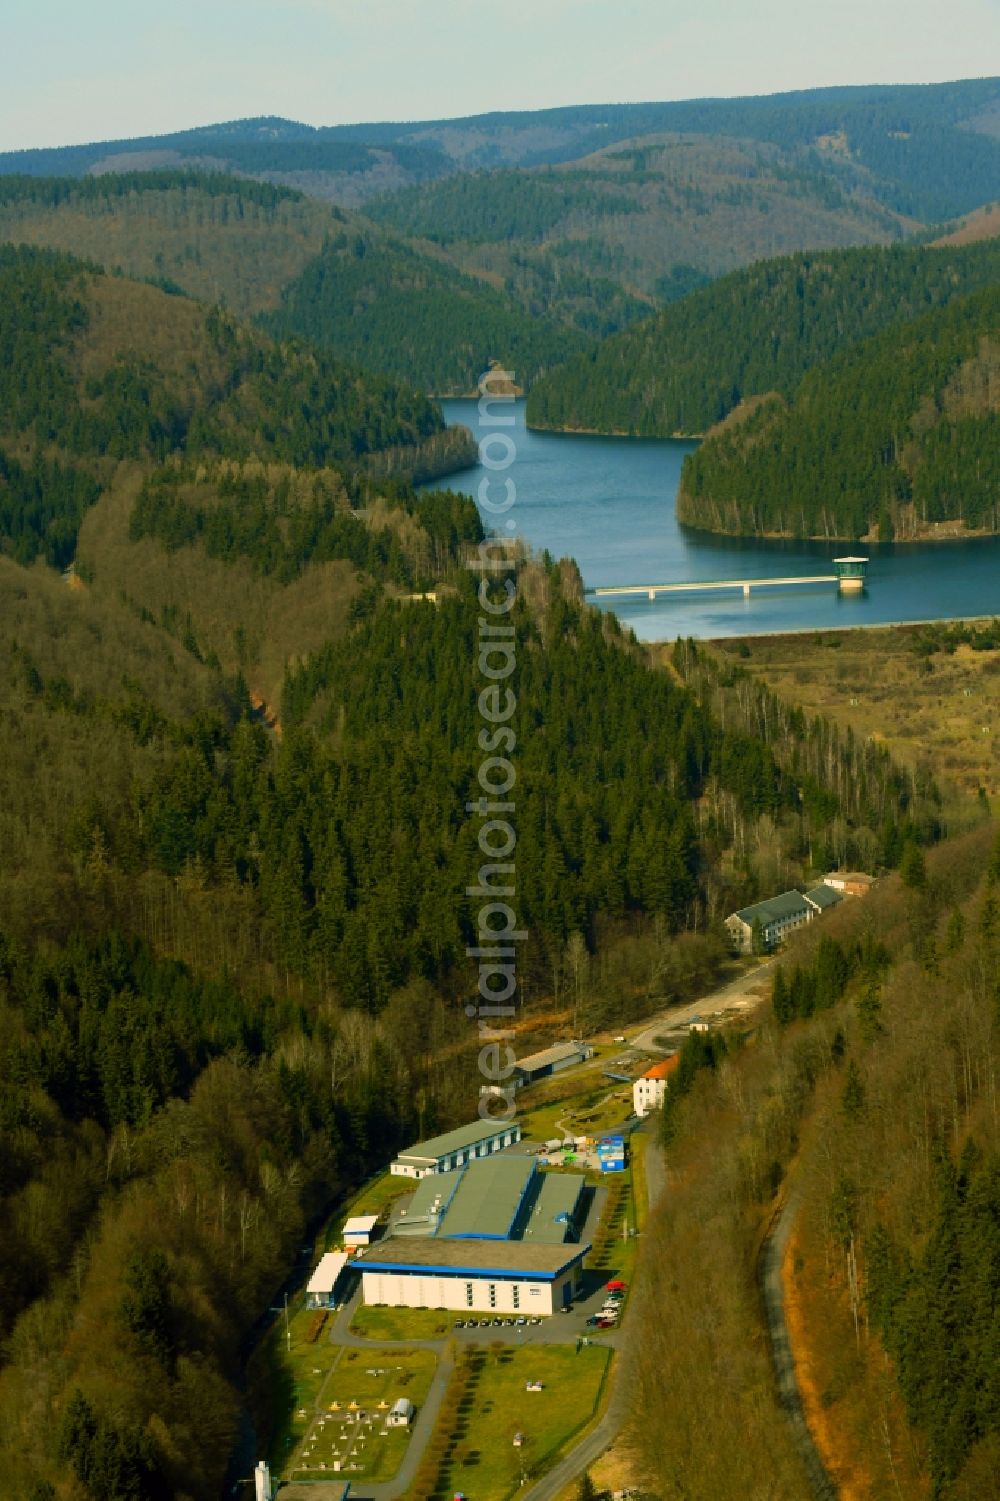 Aerial image Schleusegrund - Riparian areas on the Talsperre Schoenbrunn reservoir with raw water extraction tower and Steinschuett dam in Schleusegrund in the southern Thuringian Forest in the state of Thuringia, Germany